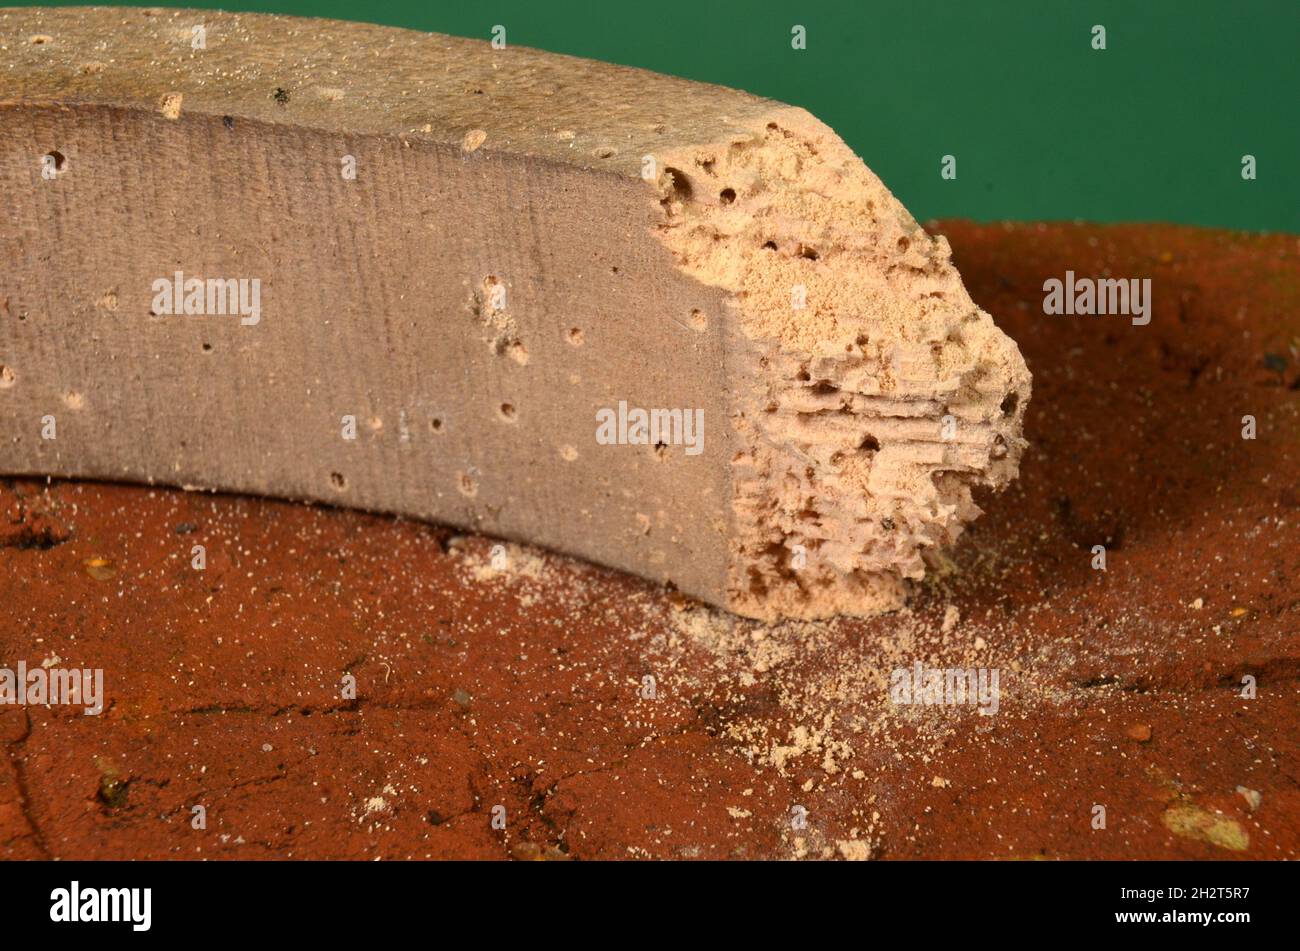 Macrophoto on raw wood decayed by common furniture beetles, ther dust close to the object indicates that there is recent furniture beetle activity Stock Photo